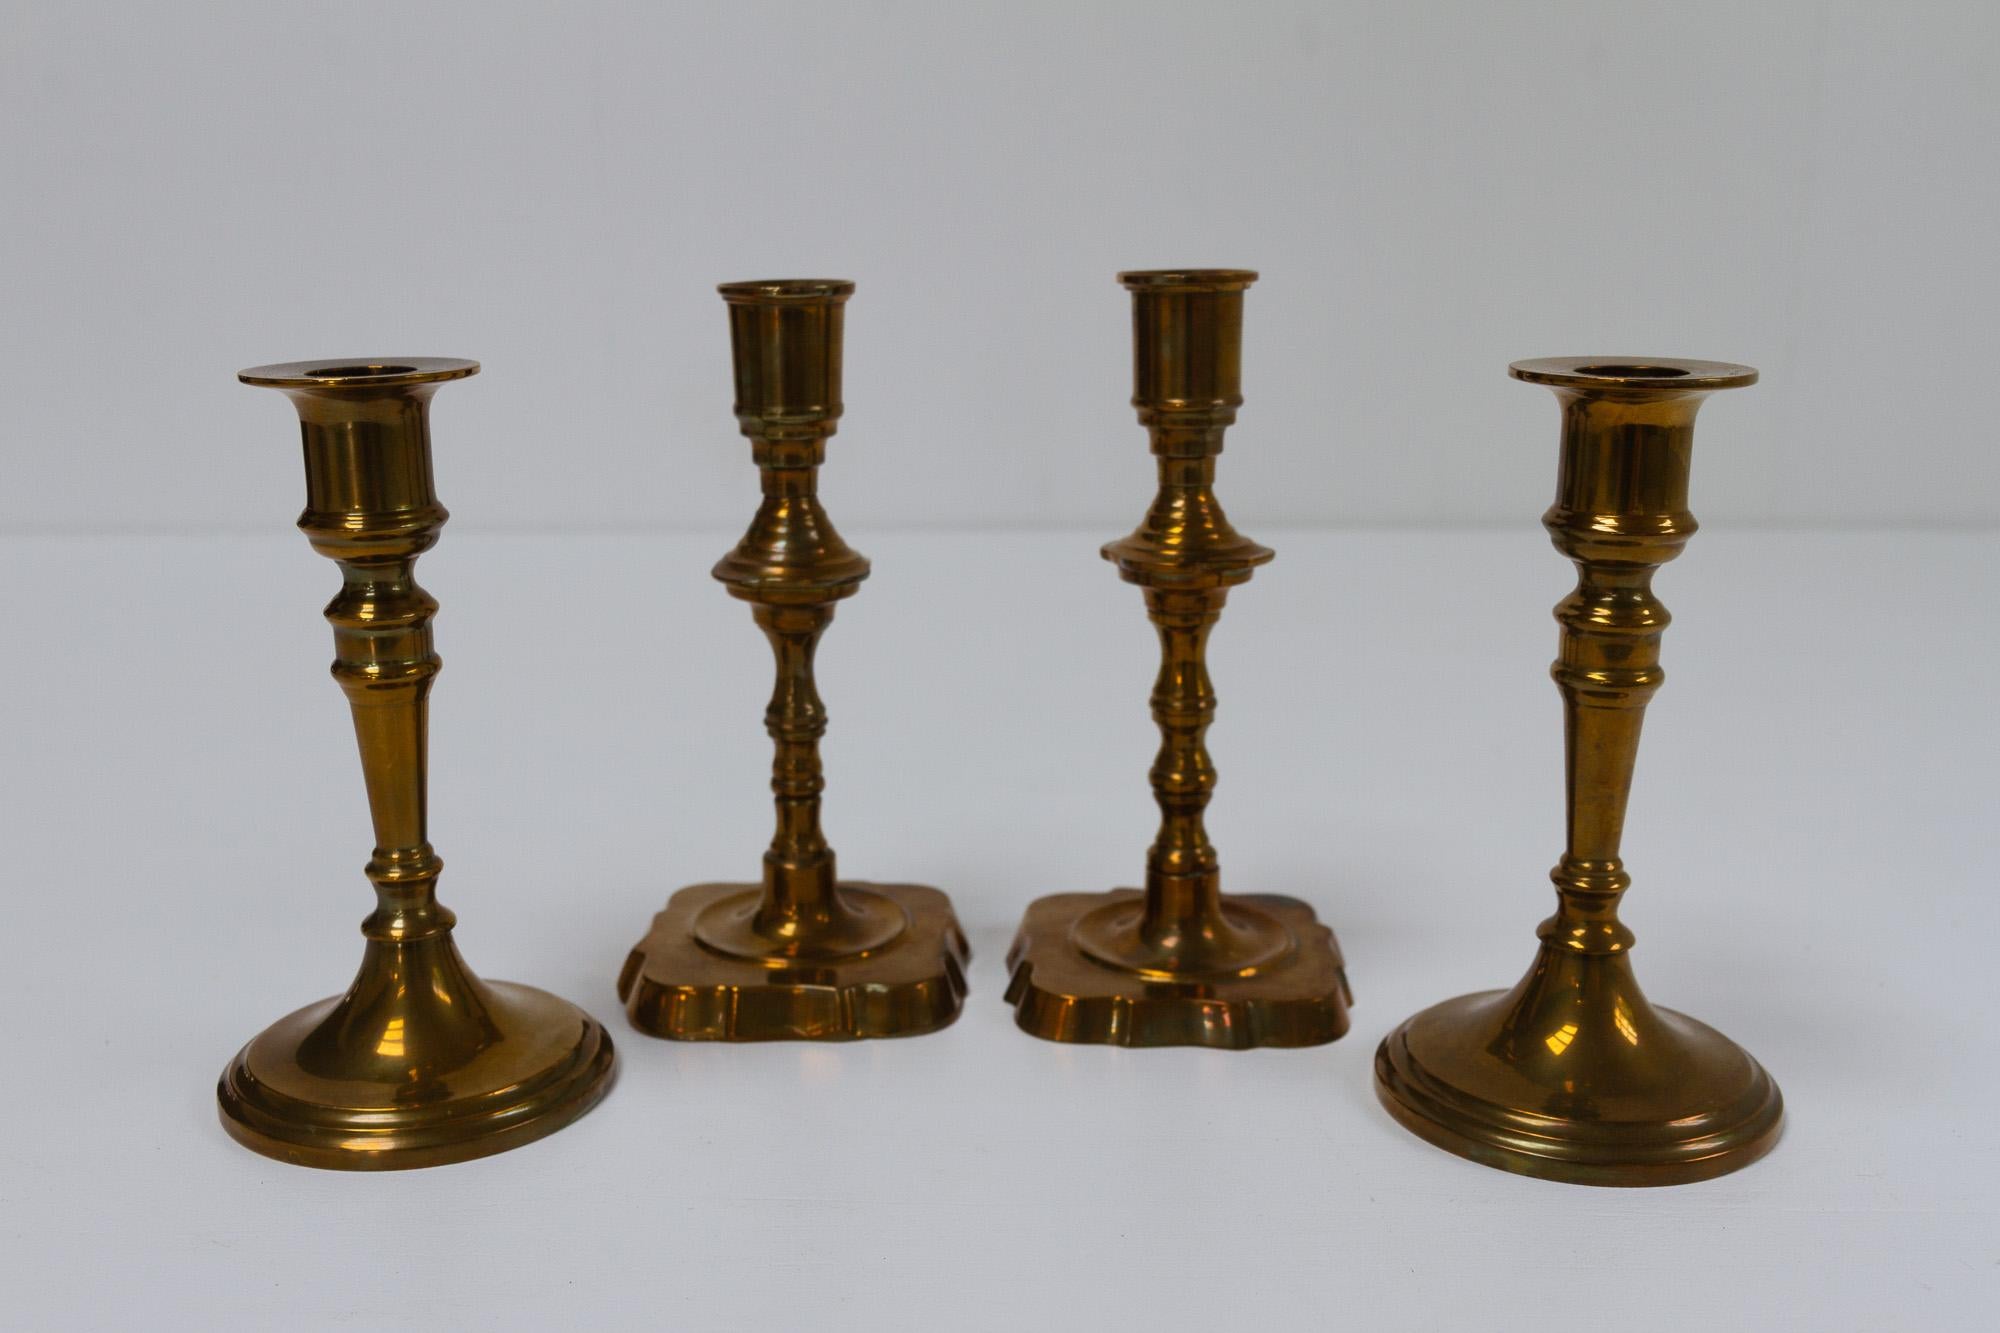 Vintage Danish Malm Candle Holders, 1950s. Set of 4.
Two pairs of candleholders in malm, which is a brass alloy with added copper. The cobber gives the brass a darker color. 
The height is 15 and 16.5 centimeters. Manufactured in Denmark in the mid